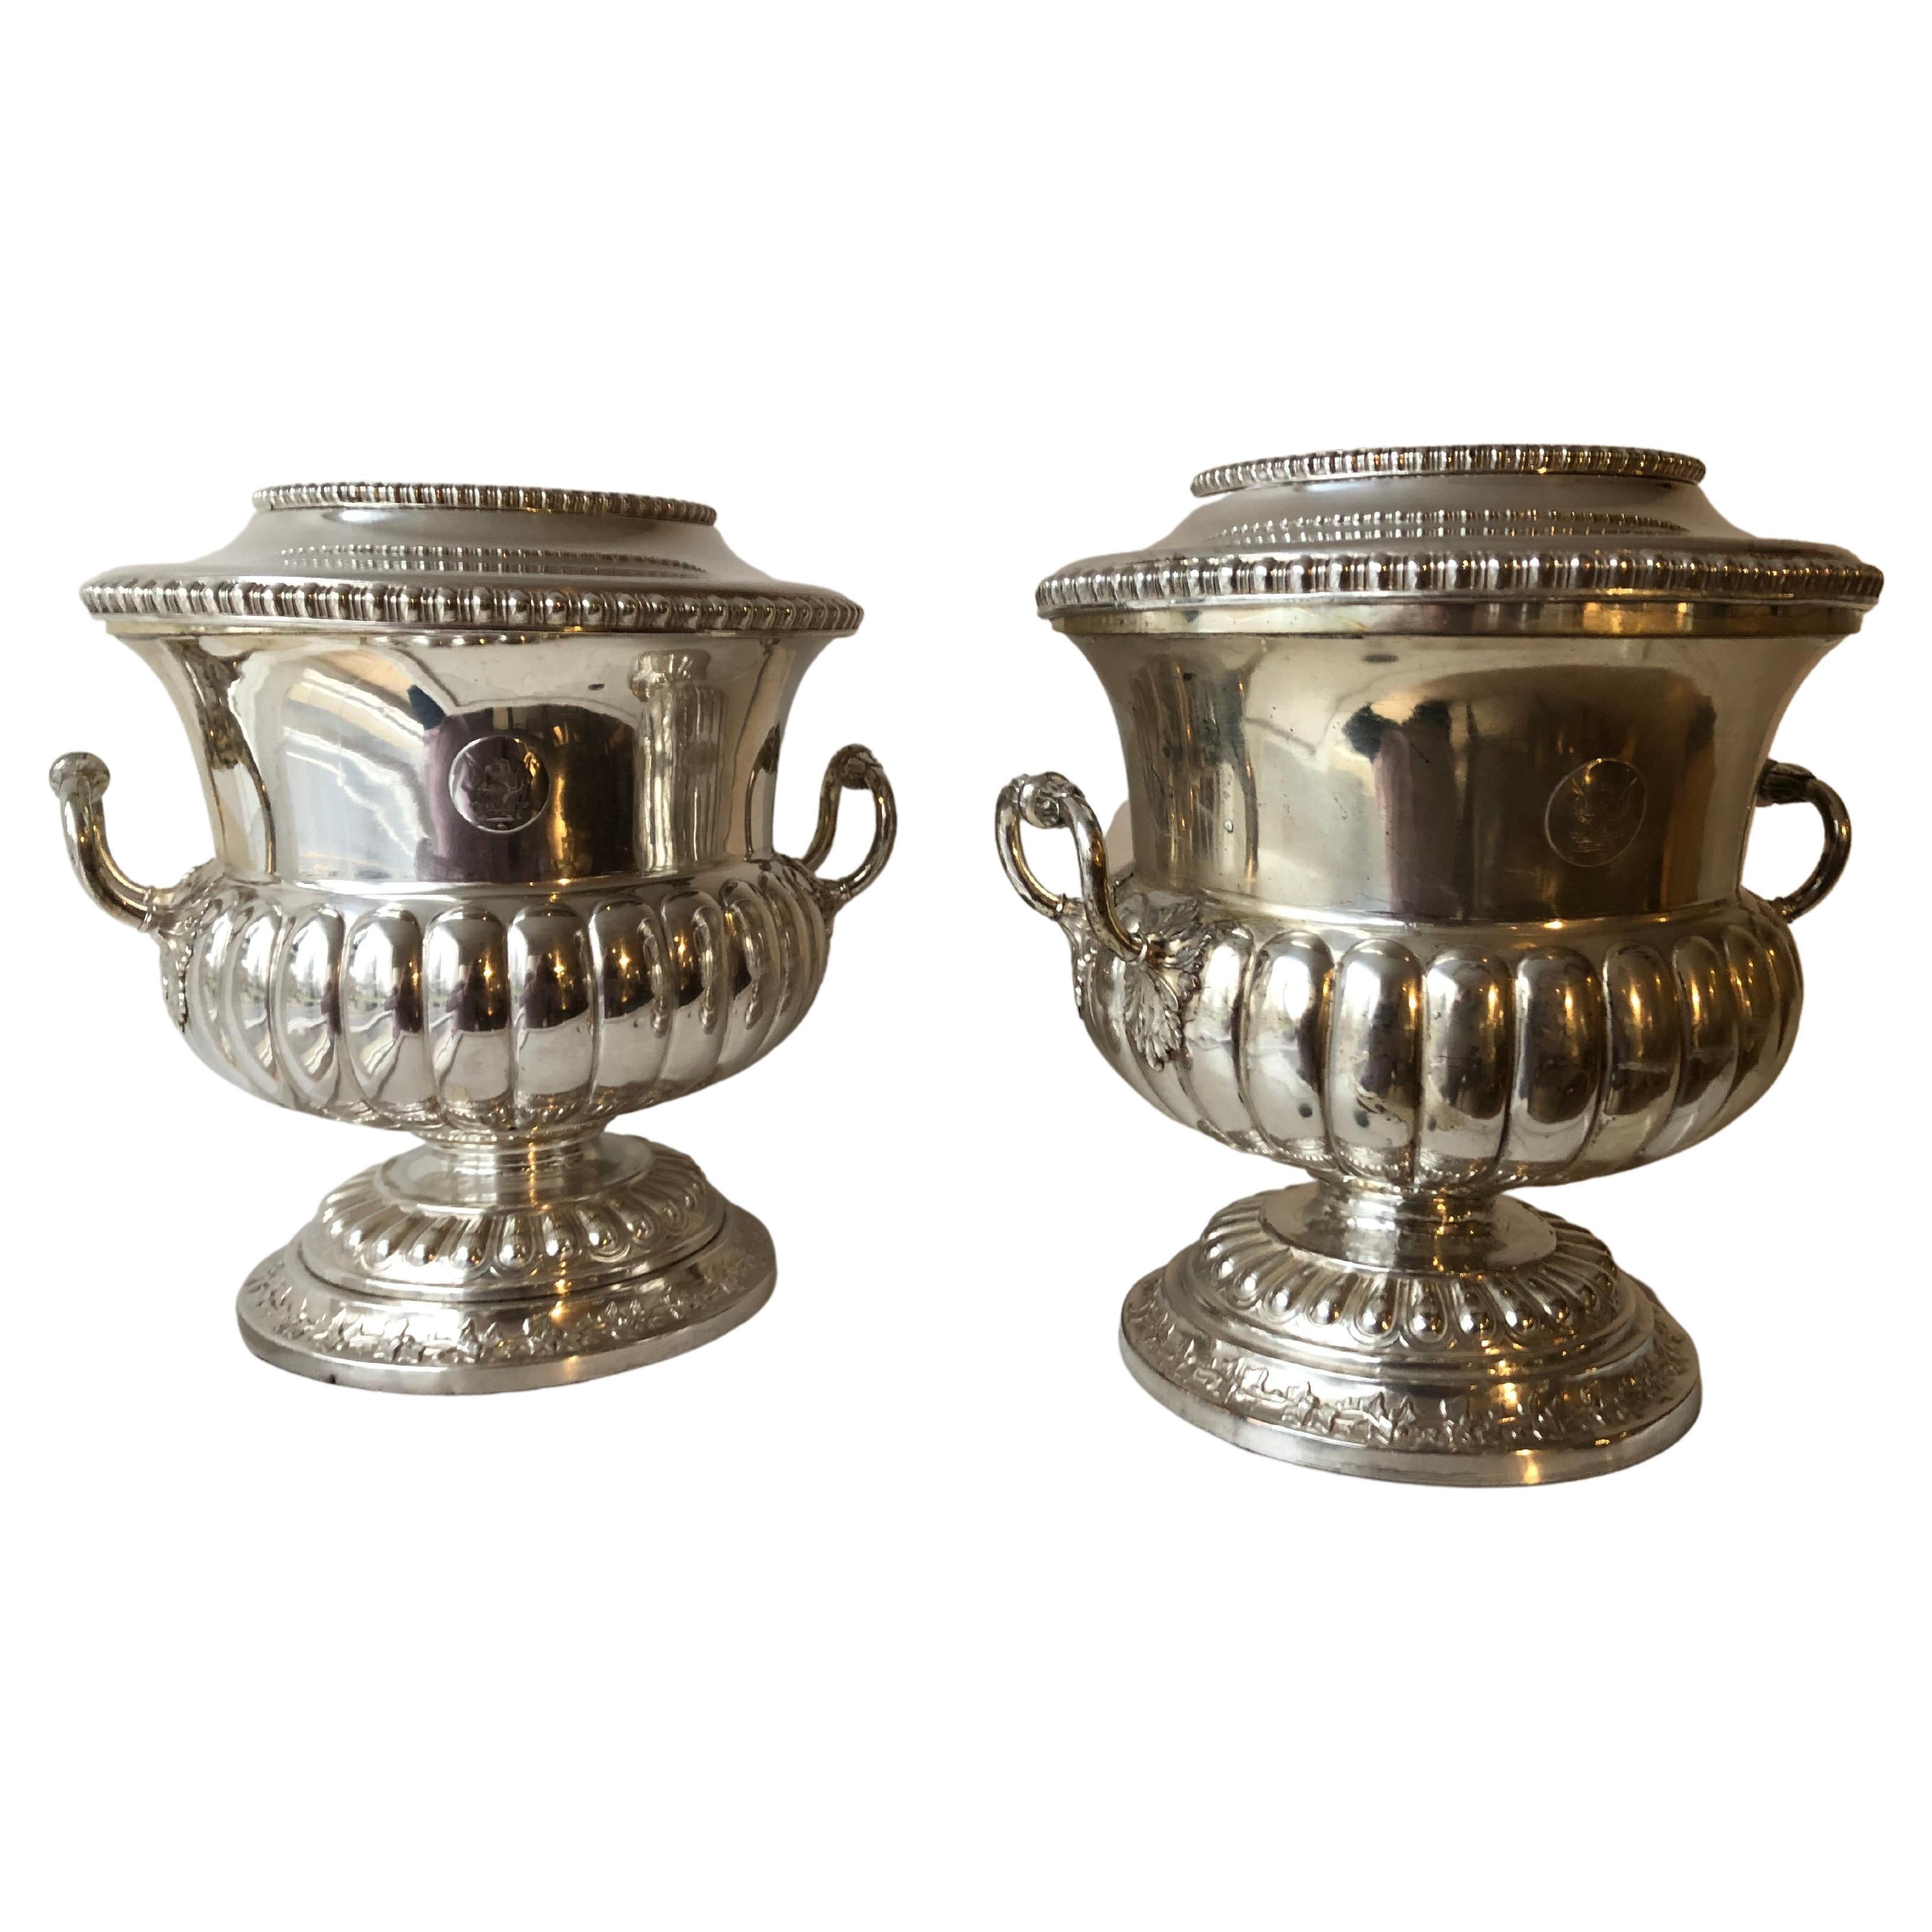 Pair of Sheffield silver plated wine coolers, each cooler consists of three pieces ,rim to top interior bucket and the main housing for ice around the liner for cooling, double handles elegant Regency design.